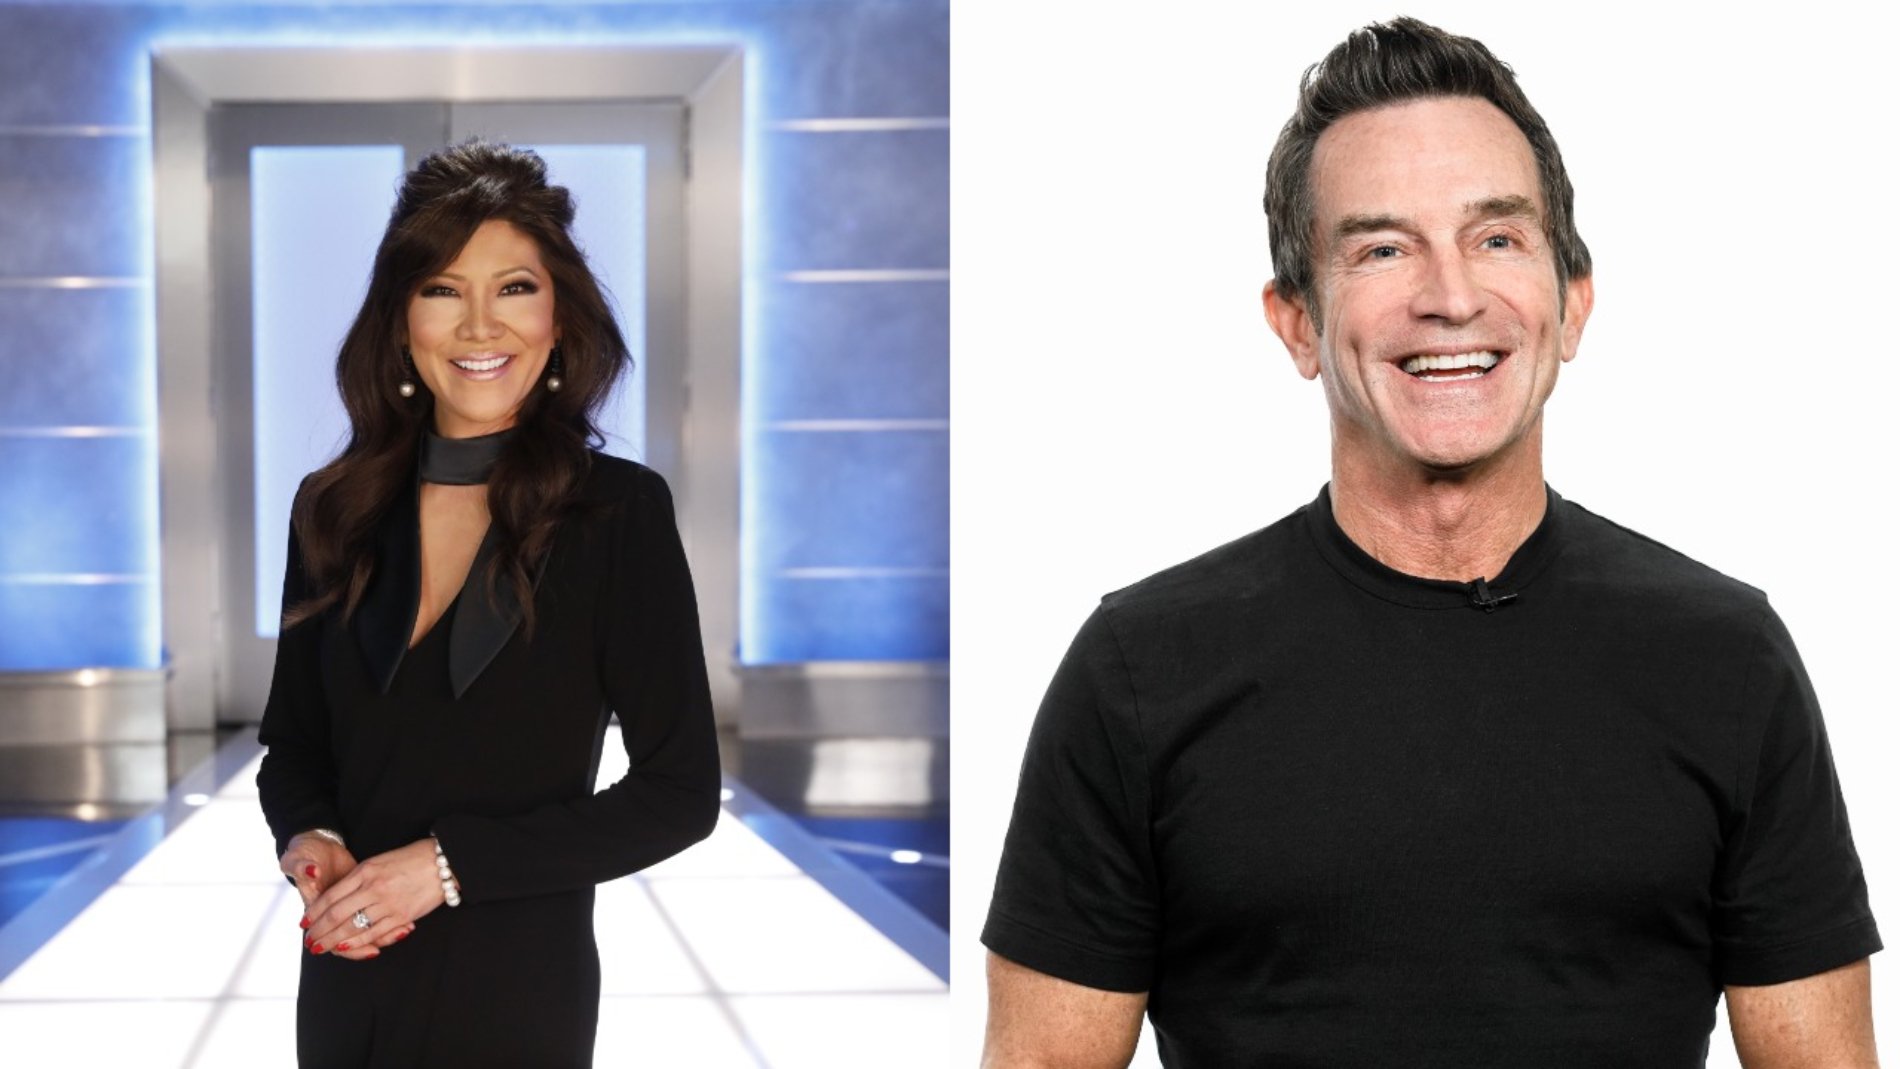 Julie Chen Moonves from 'Big Brother'; Jeff Probst from 'Survivor'